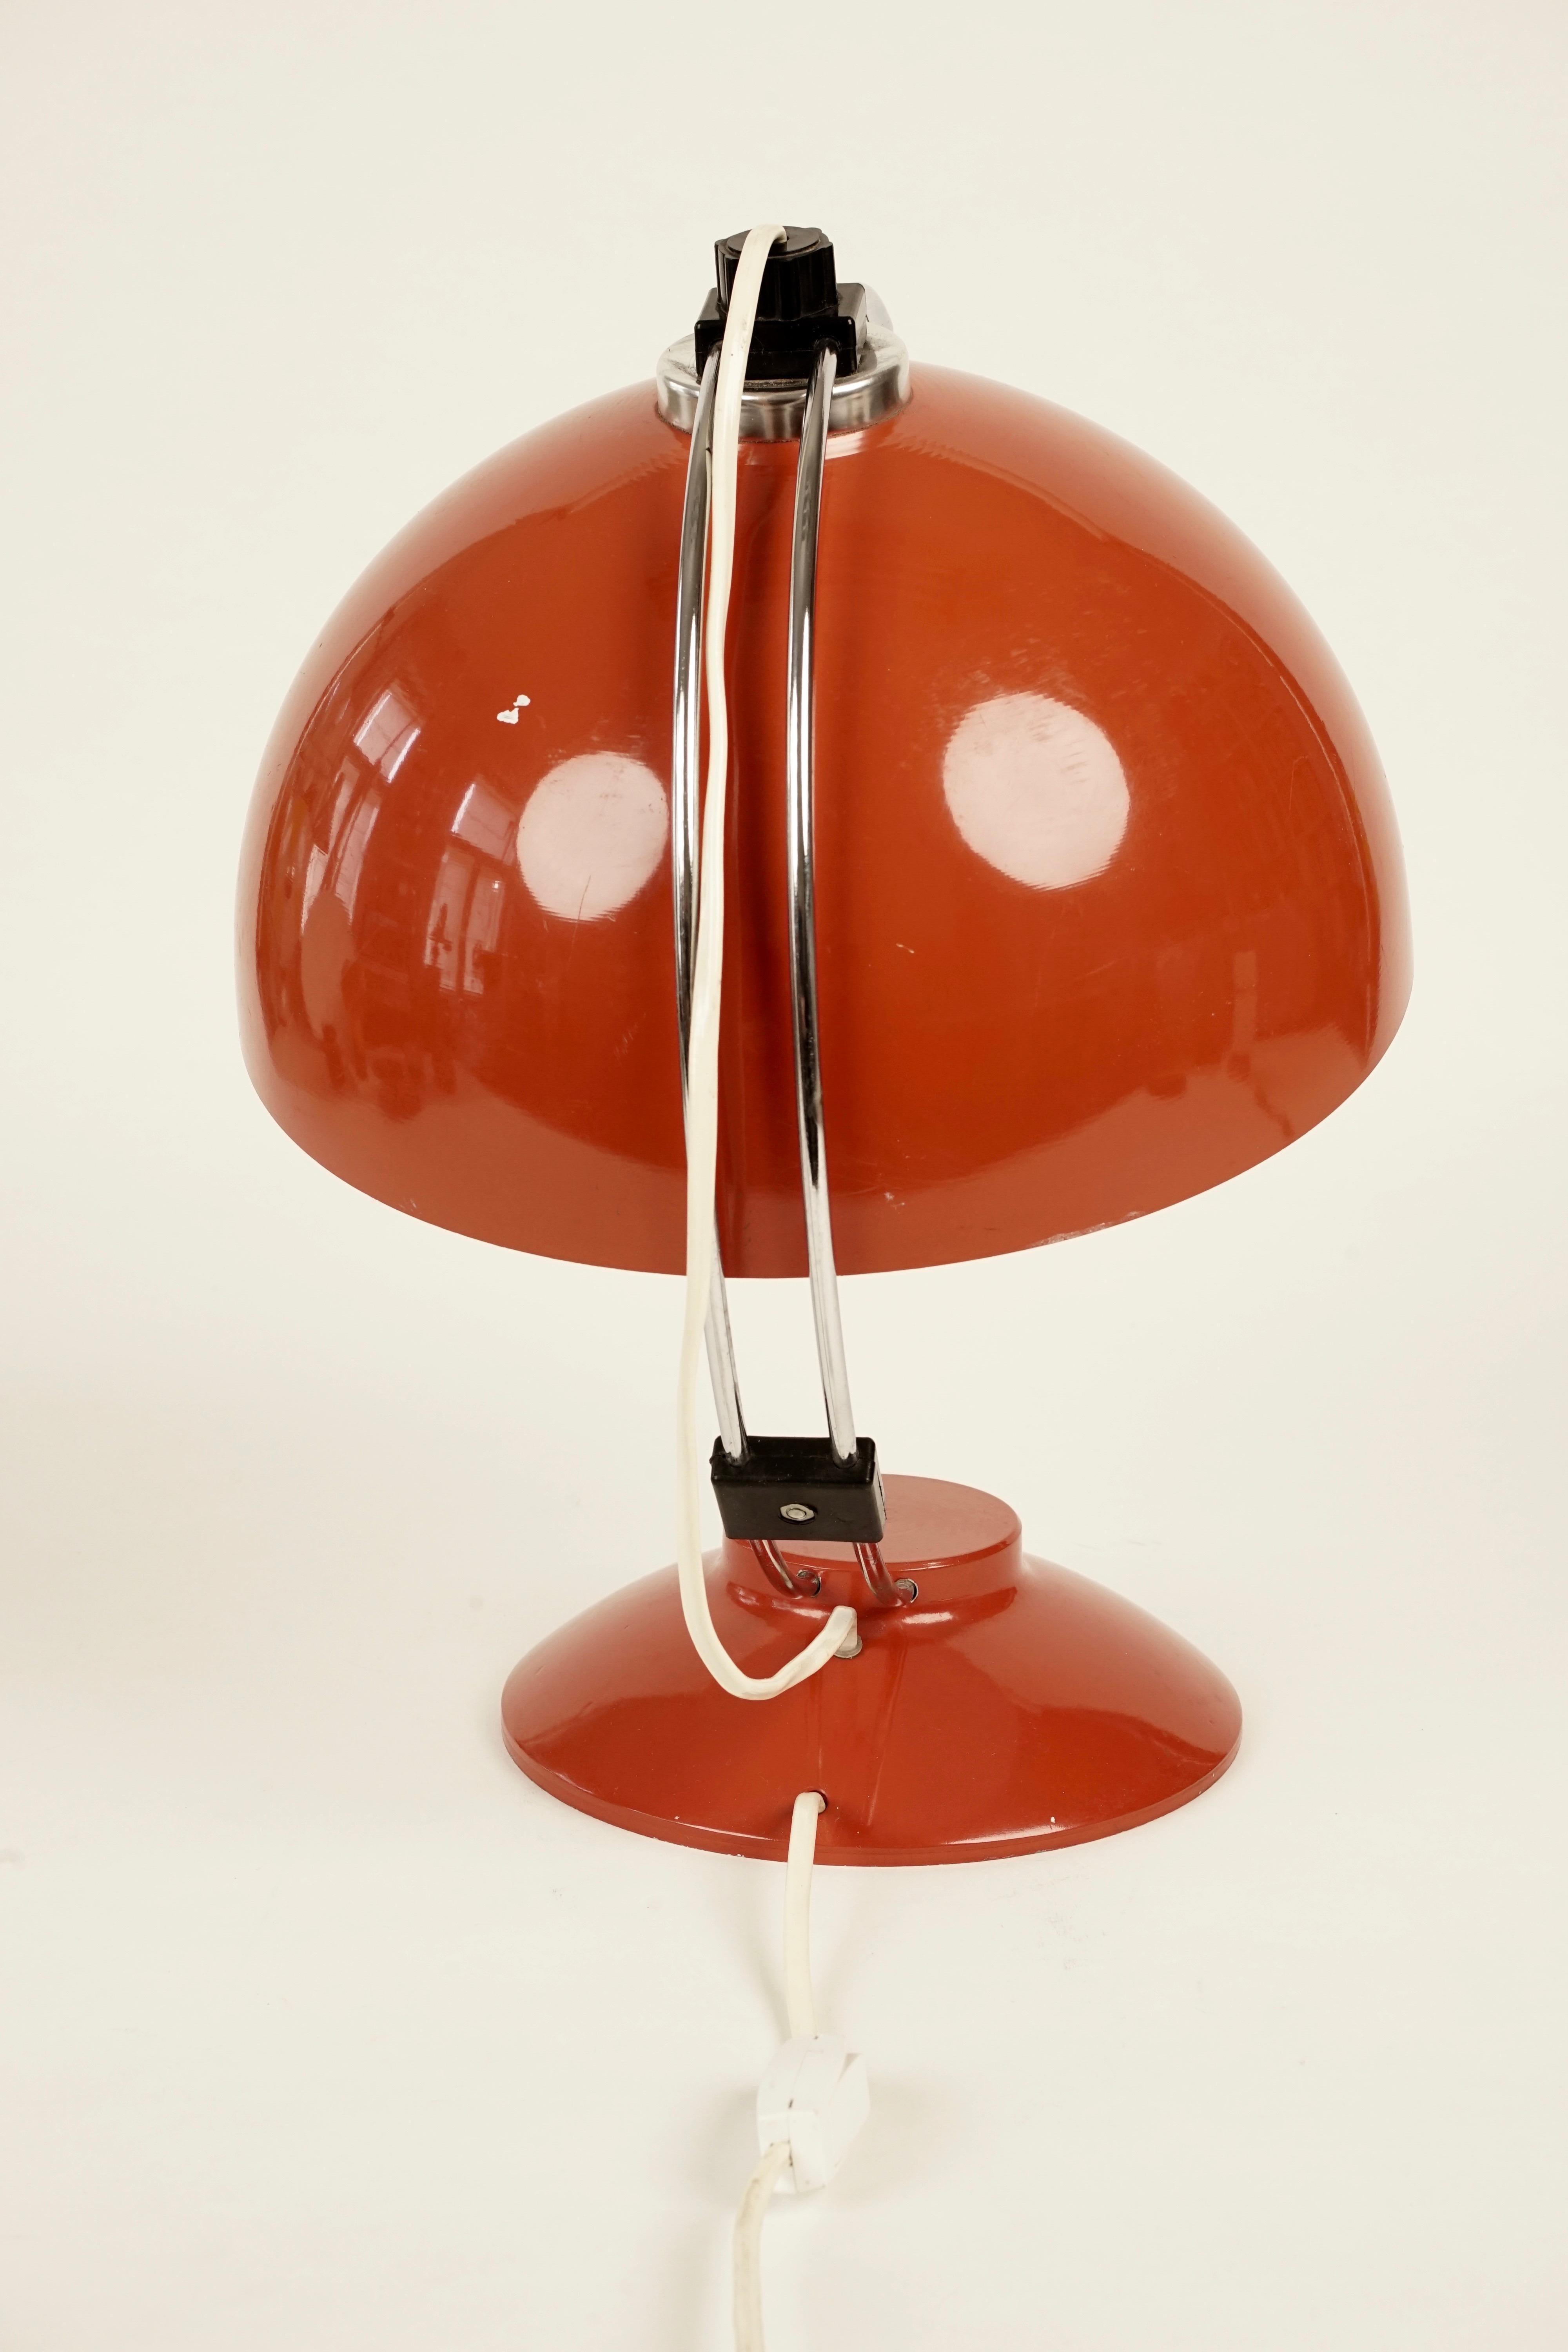 A beautiful red table lamp from the 1970s. The lamp is composed of a heavy red base with a curved chrome stem.
The shade can be adjusted by sliding it along the stem.